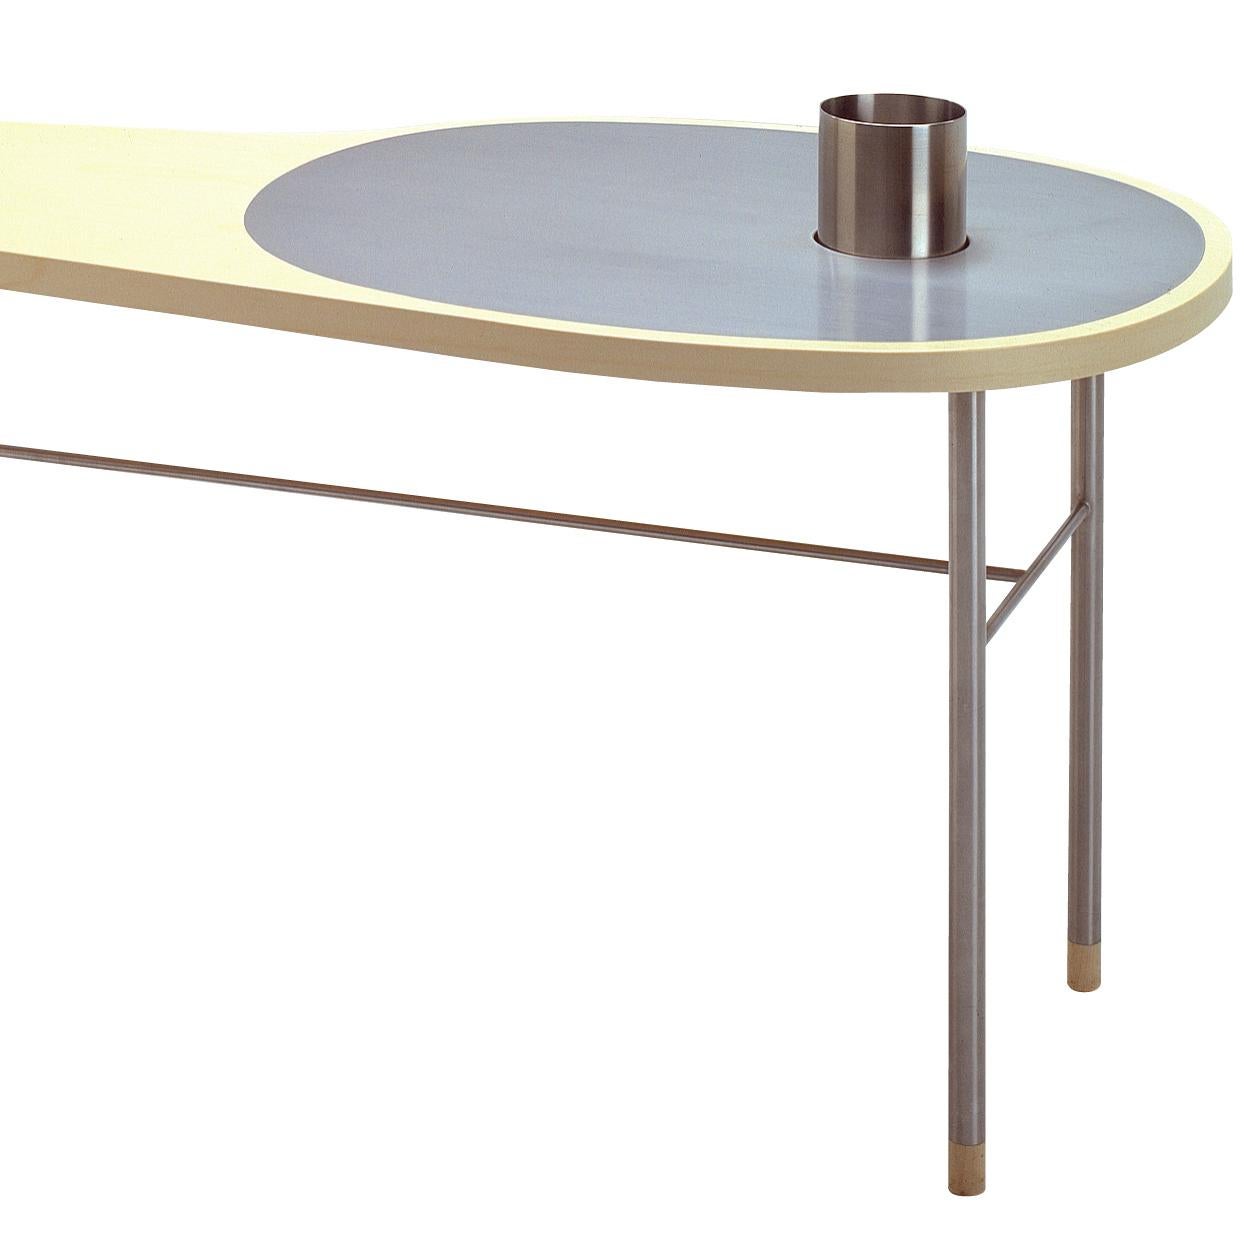 Table designed by Finn Juhl in 1948, relaunched in 2000.
Manufactured by House of Finn Juhl in Denmark.

A large share of Finn Juhl’s designs were commissioned assignments - often as part of his business as a renowned interior designer. The Ross